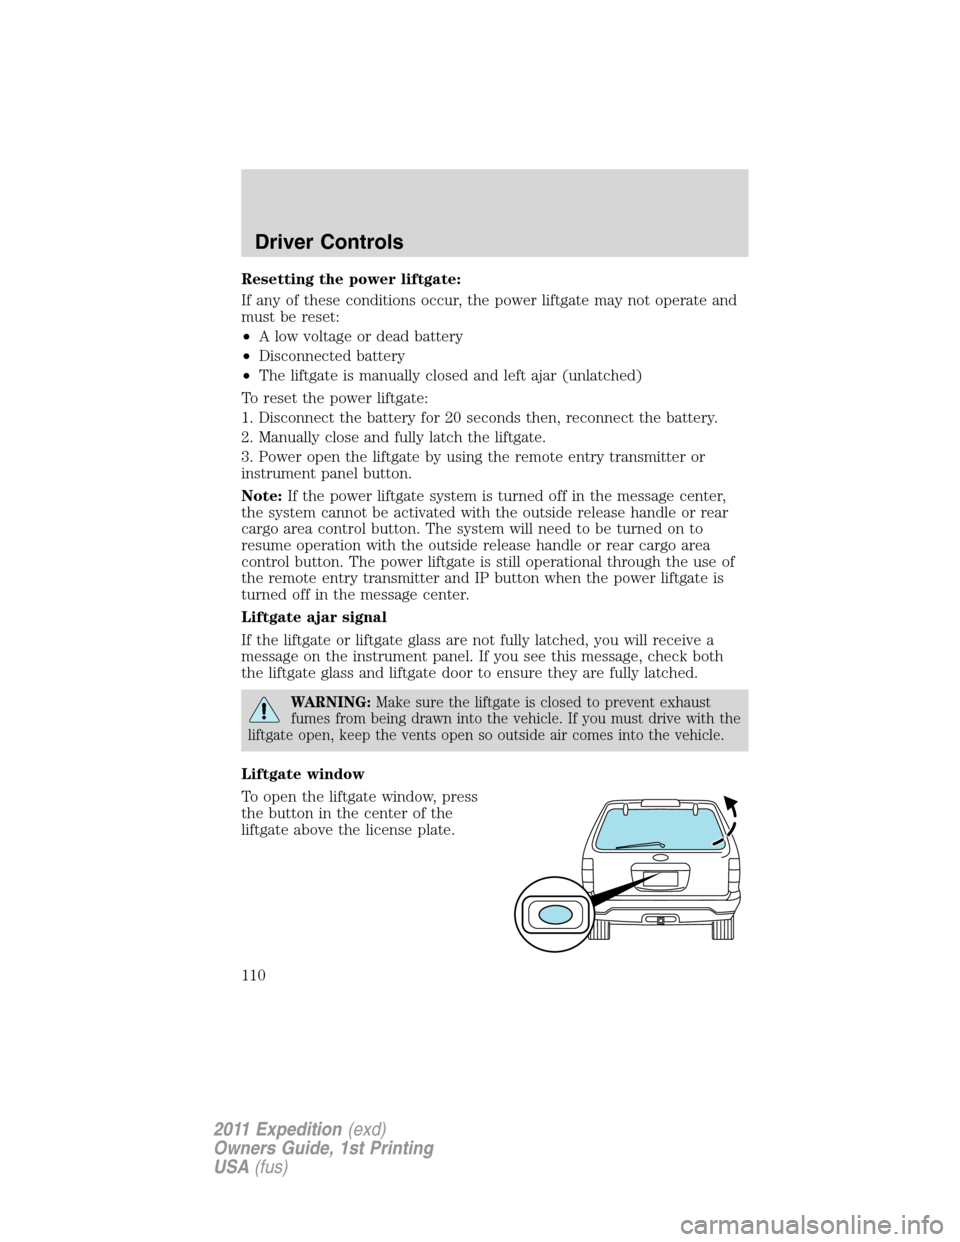 FORD EXPEDITION 2011 3.G Owners Manual Resetting the power liftgate:
If any of these conditions occur, the power liftgate may not operate and
must be reset:
•A low voltage or dead battery
•Disconnected battery
•The liftgate is manual